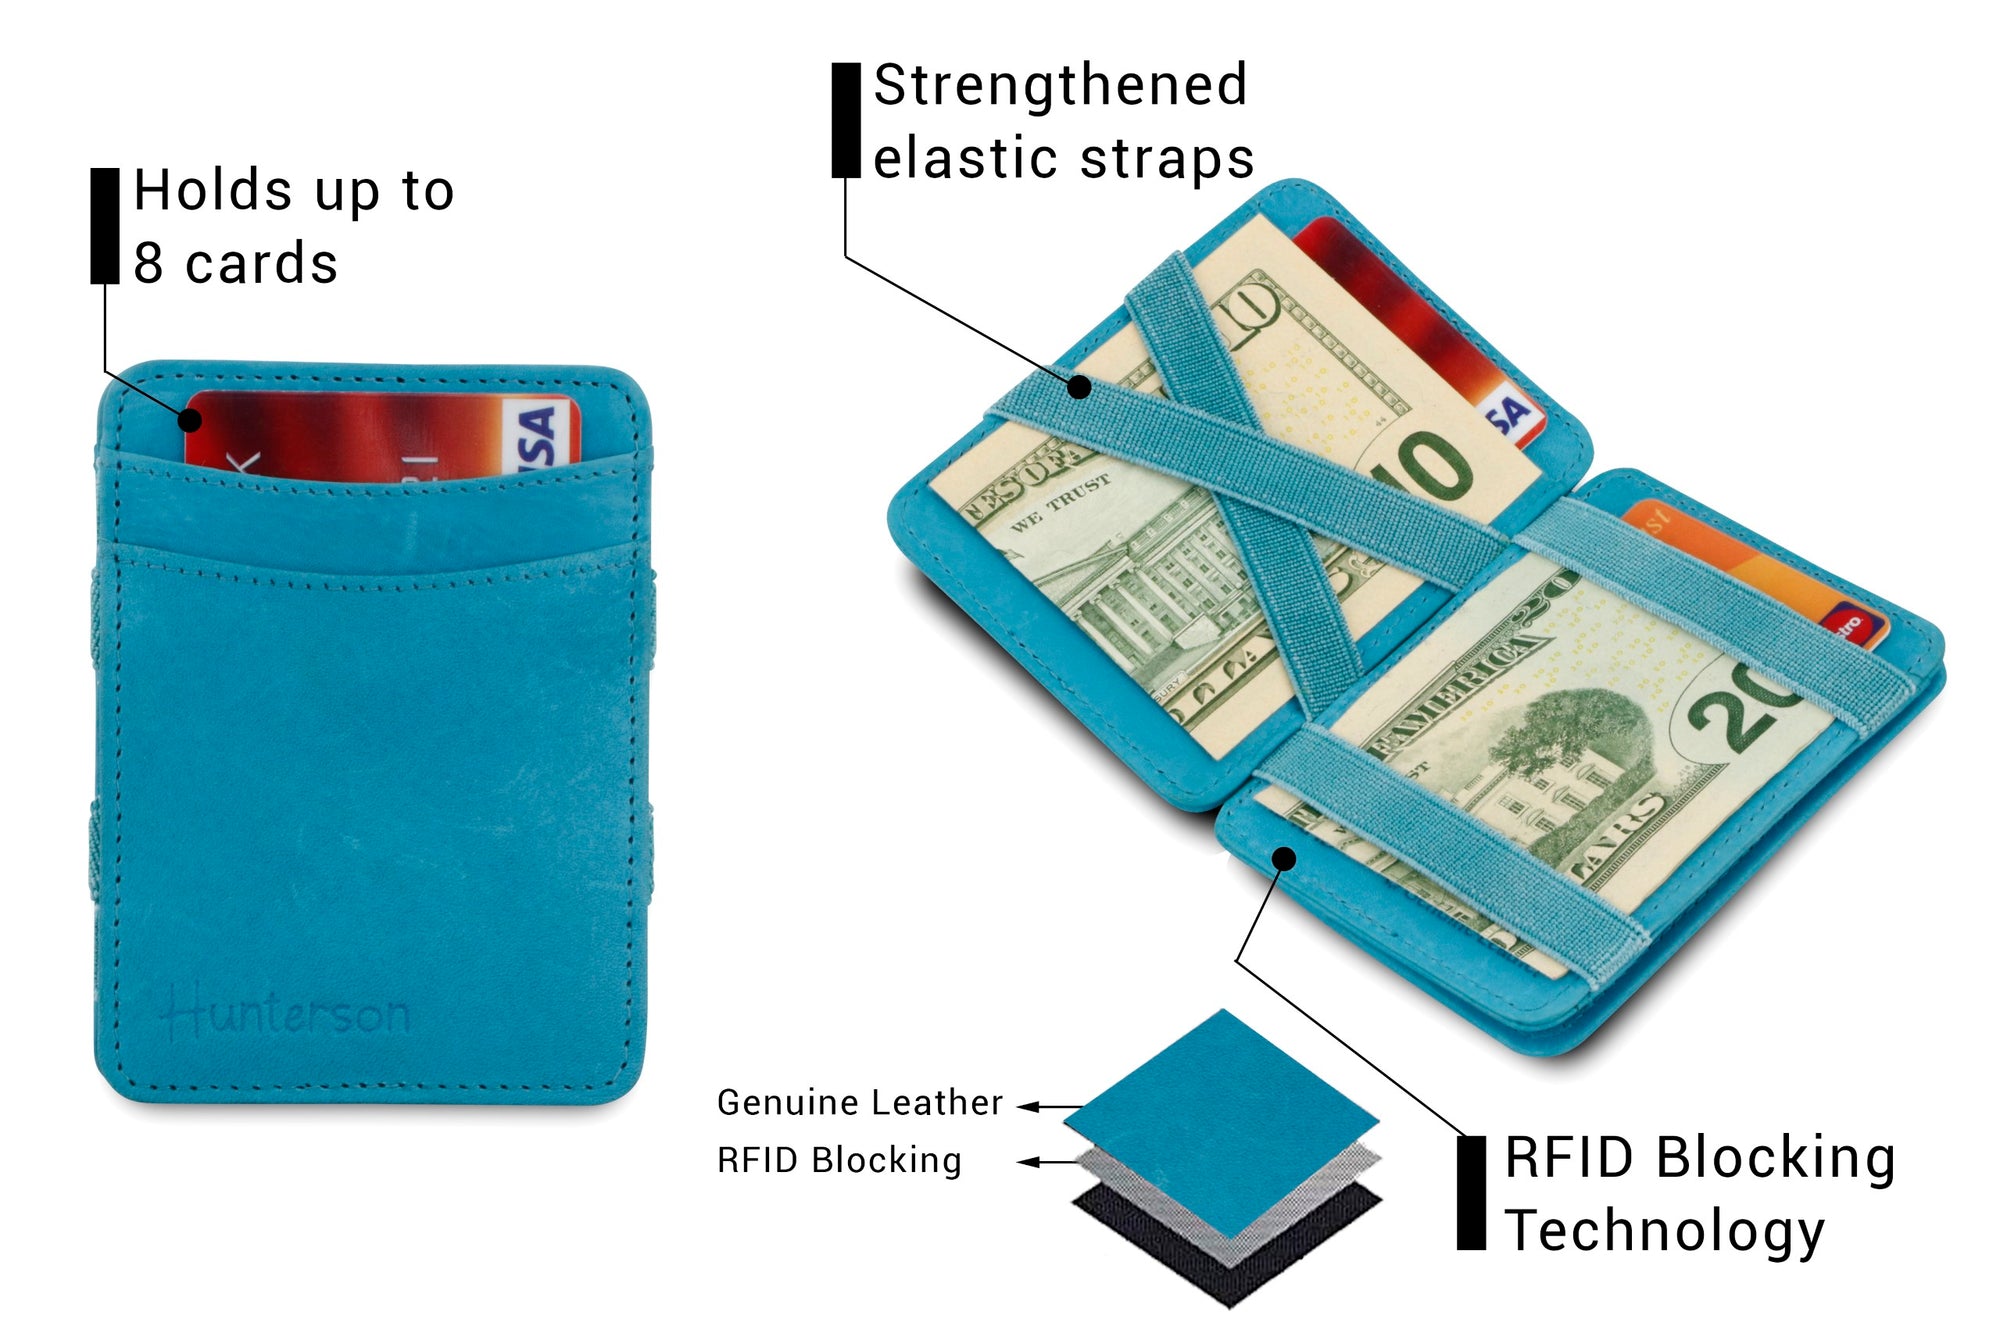 Magic Coin Wallet RFID Hunterson - Turquoise - 3